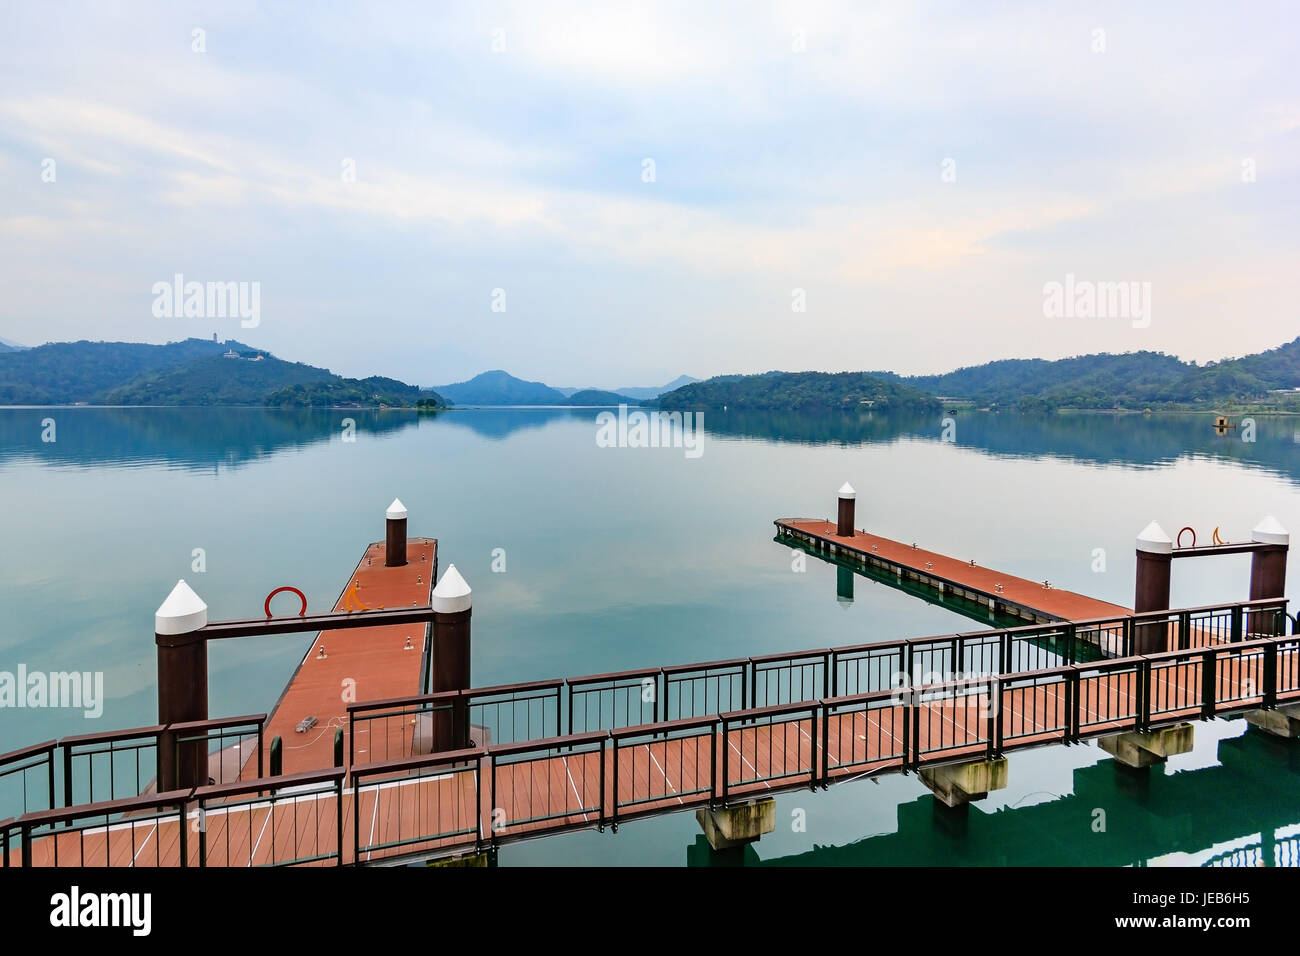 Long exposure of harbor with boats in the morning time at Sun Moon Lake, Nantou city, Taiwan Stock Photo